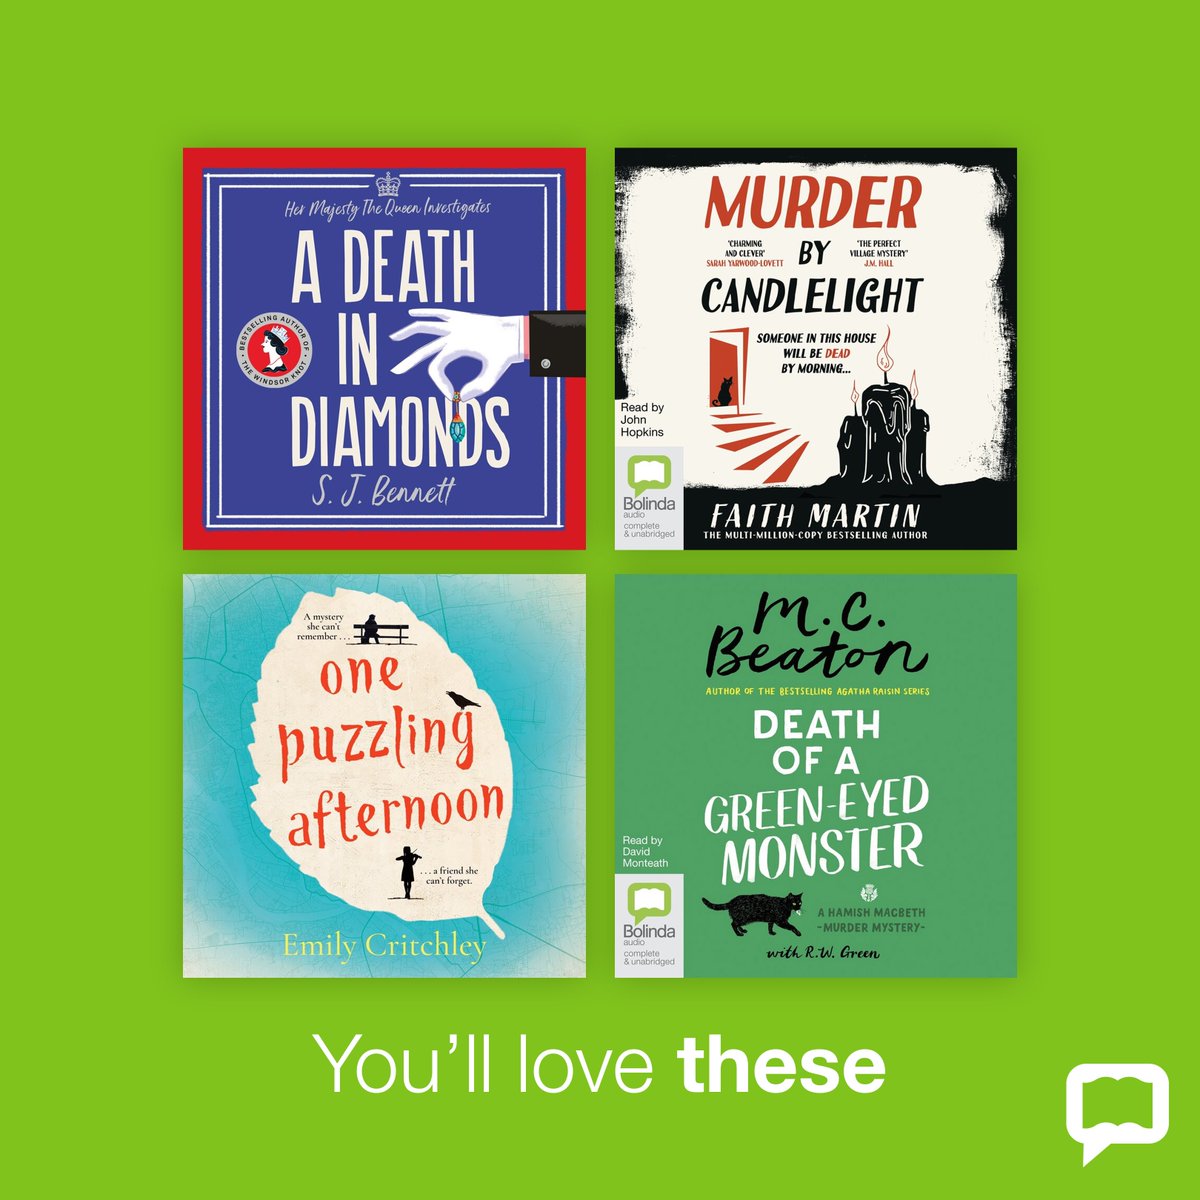 Spread the Word - Cosy Crimes to Curl Up with on #BorrowBox! In the mood for a new cosy crime to puzzle over after J.M. Hall’s A Clock Stopped Dead? Find perfect whodunnits to uncover from authors including M.C. Beaton, Faith Martin and S.J. Bennett – on @BorrowBox now!